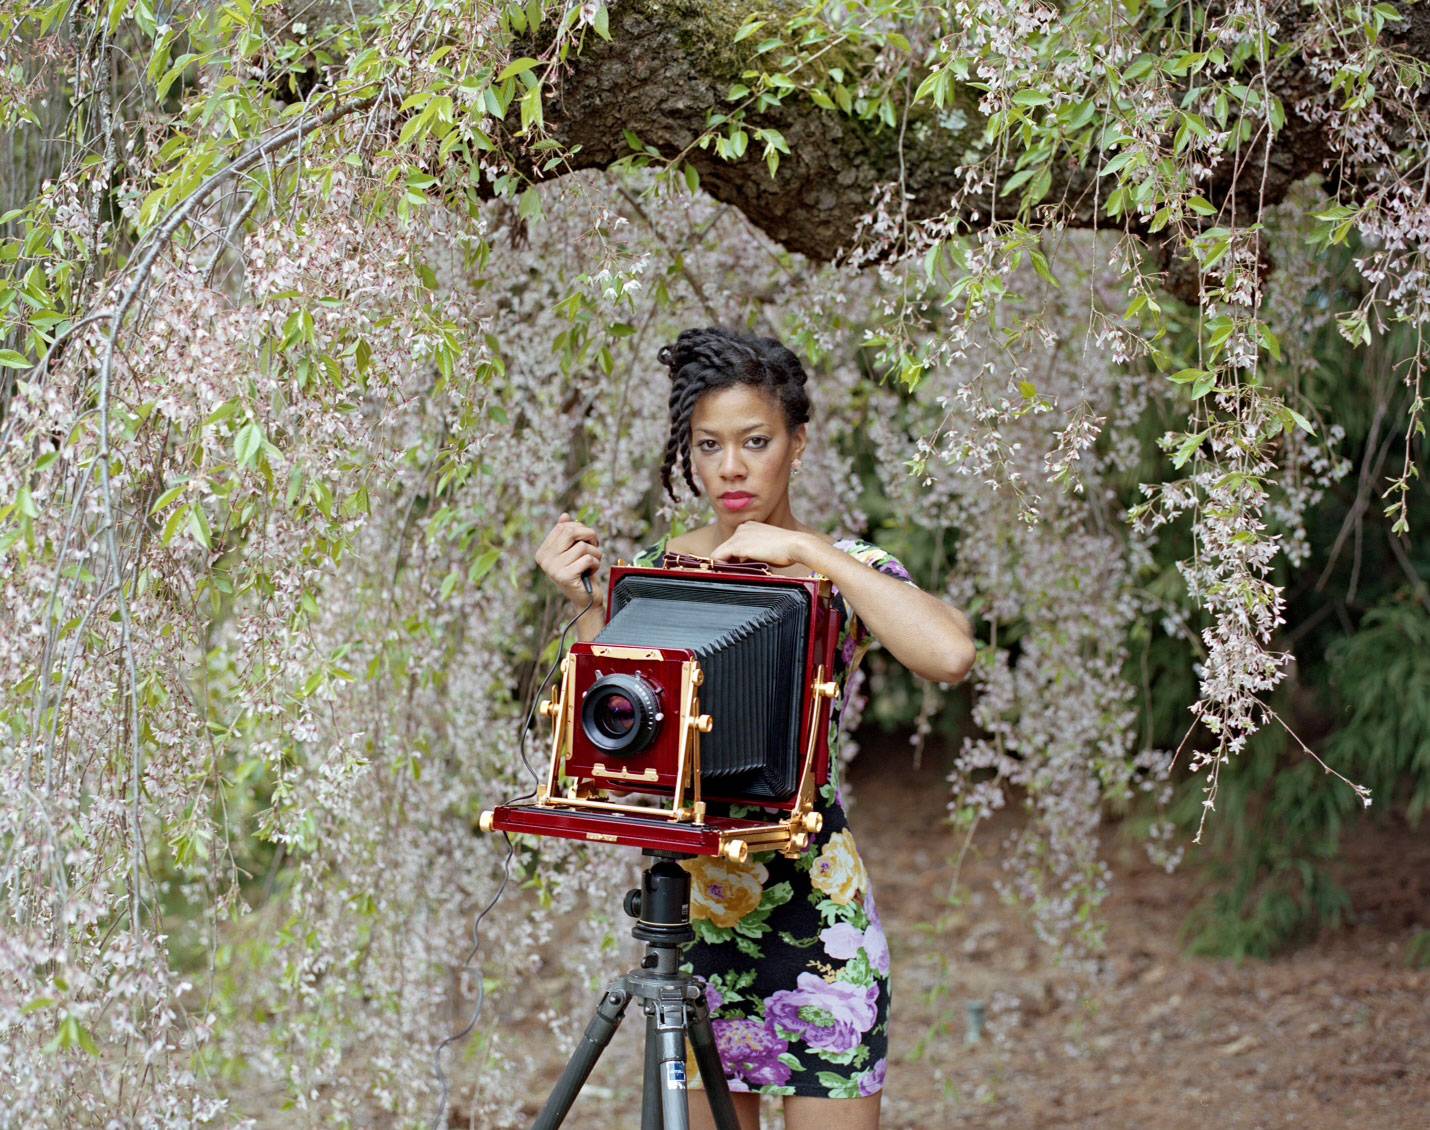 Deana Lawson behind a square-format camera amongst cherry blossoms